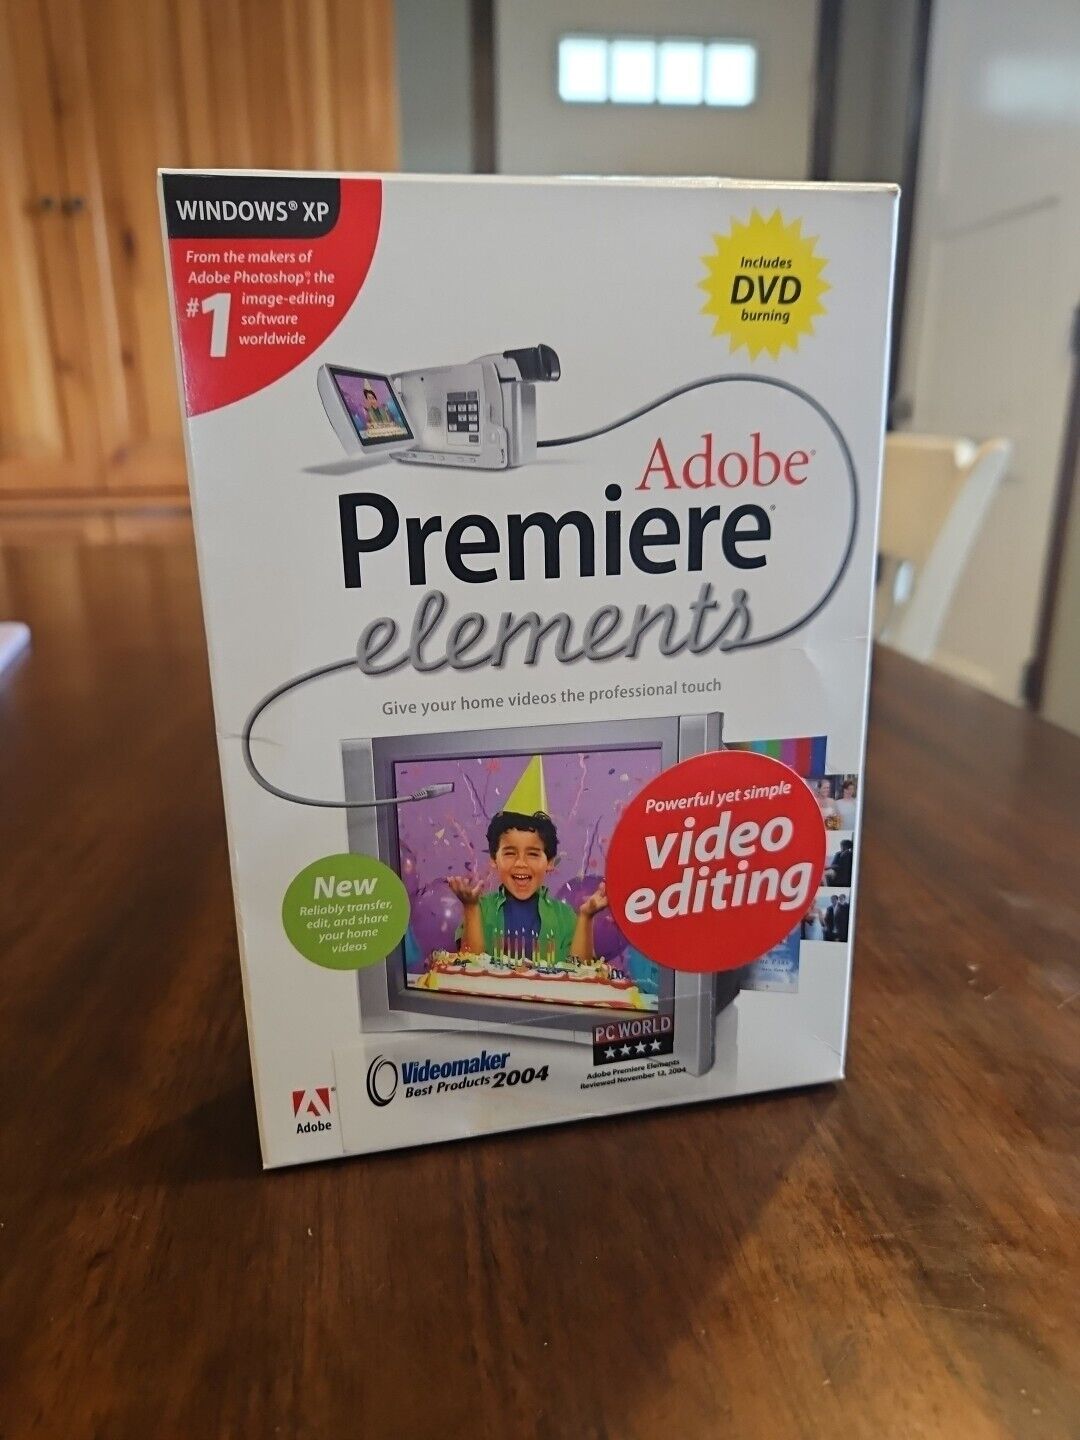 2004 Adobe Premiere Elements  Video Editing Software for Windows XP